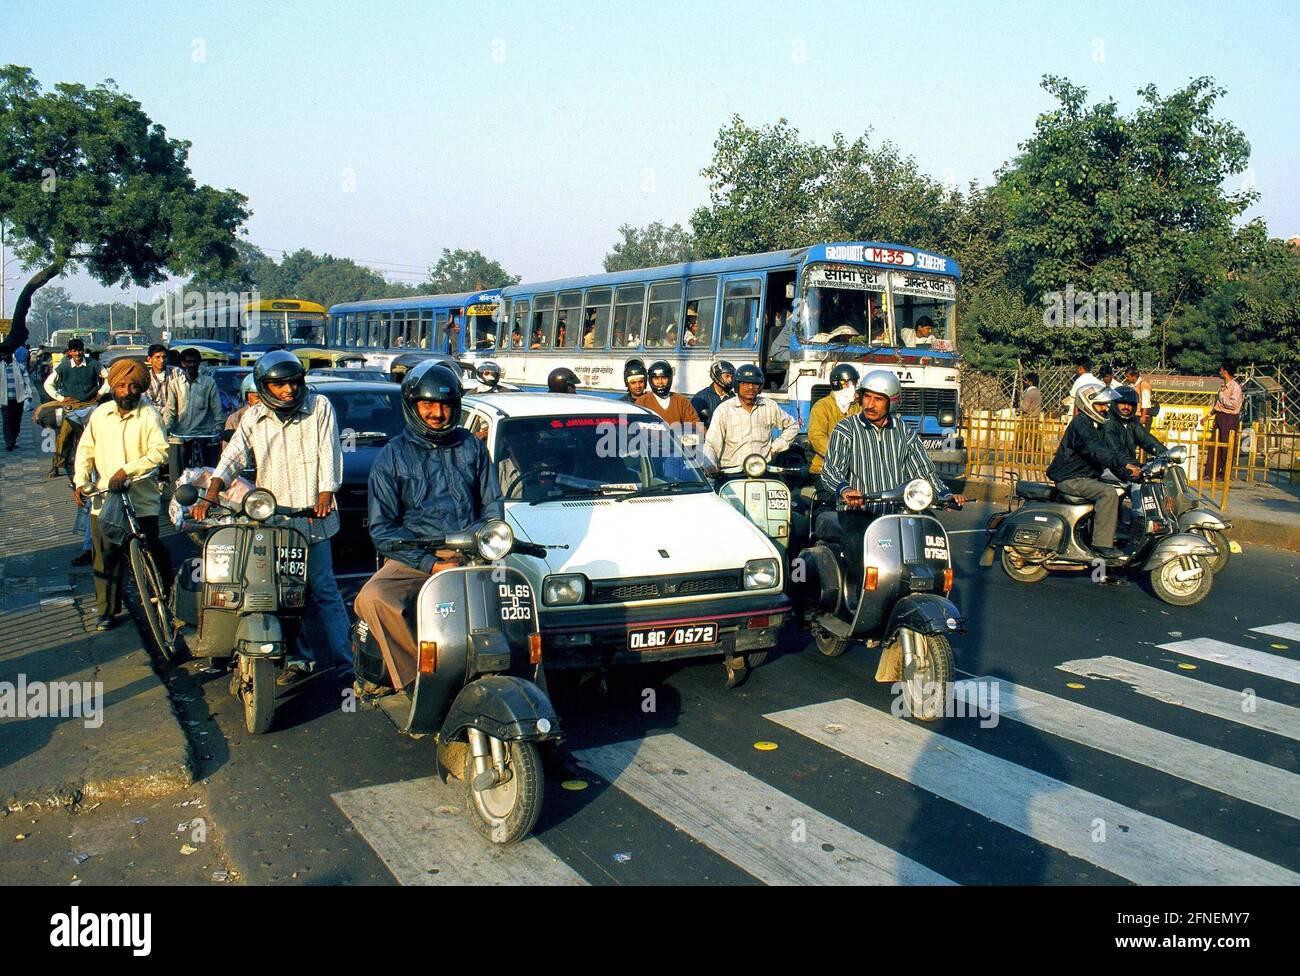 Road Traffic in New Delhi. Although the number of registered motor vehicles is growing steadily, the most popular means of transport is still the two-wheeler, whether motorised, such as the Bahaj scooters built under licence in India, or the bicycle and cycle rickshaw. [automated translation] Stock Photo